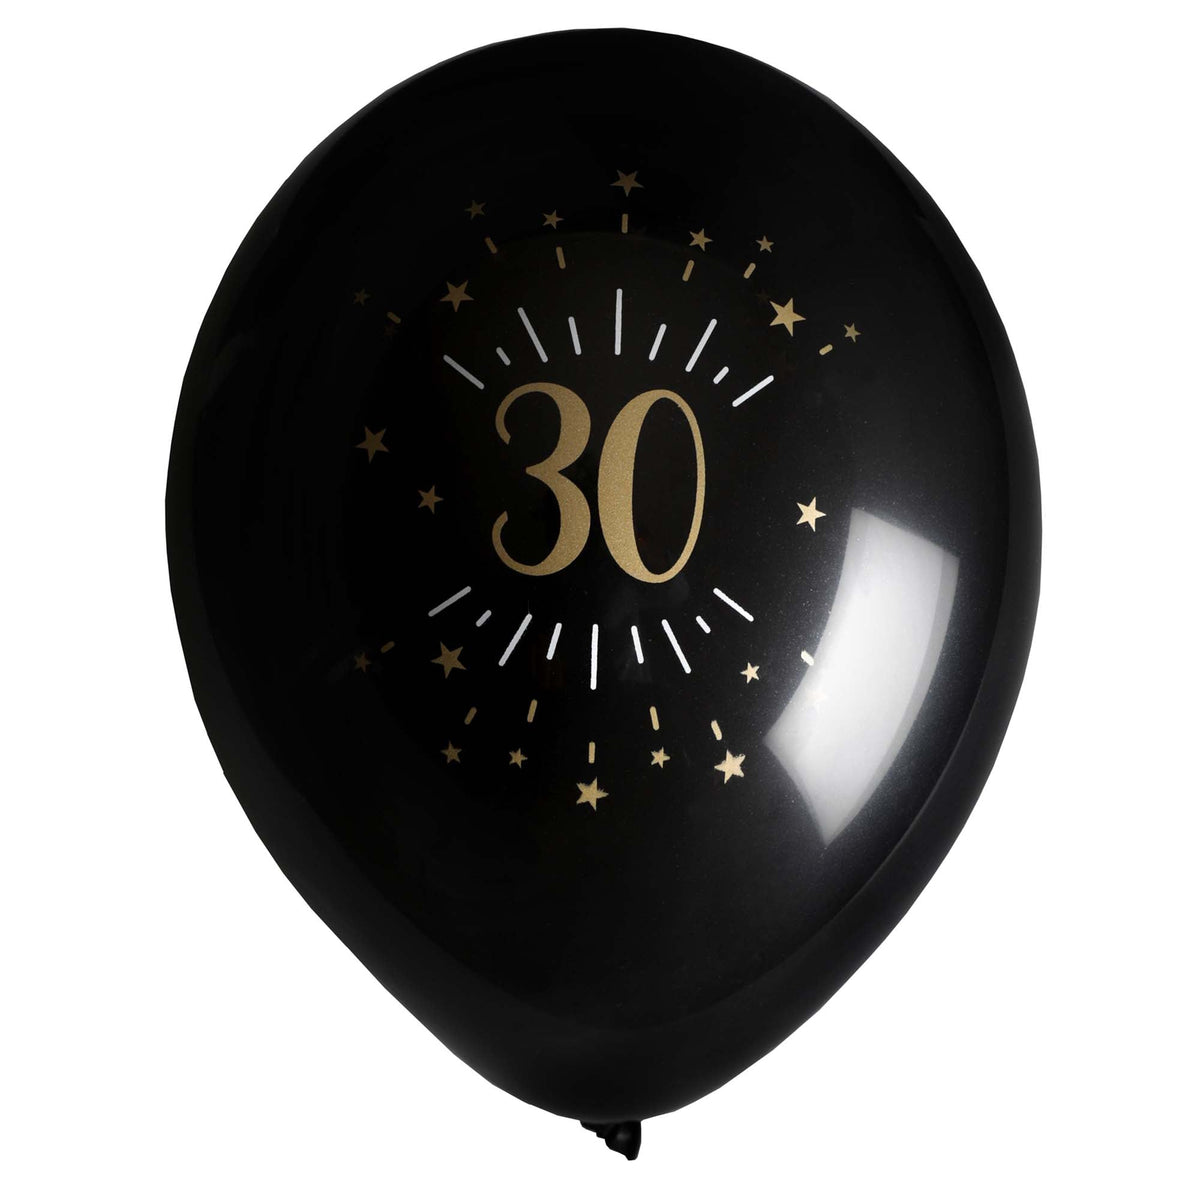 SANTEX Age Specific Birthday Black and Gold 30th Birthday Latex Balloons, 12 Inches, 6 Count 3660380070405